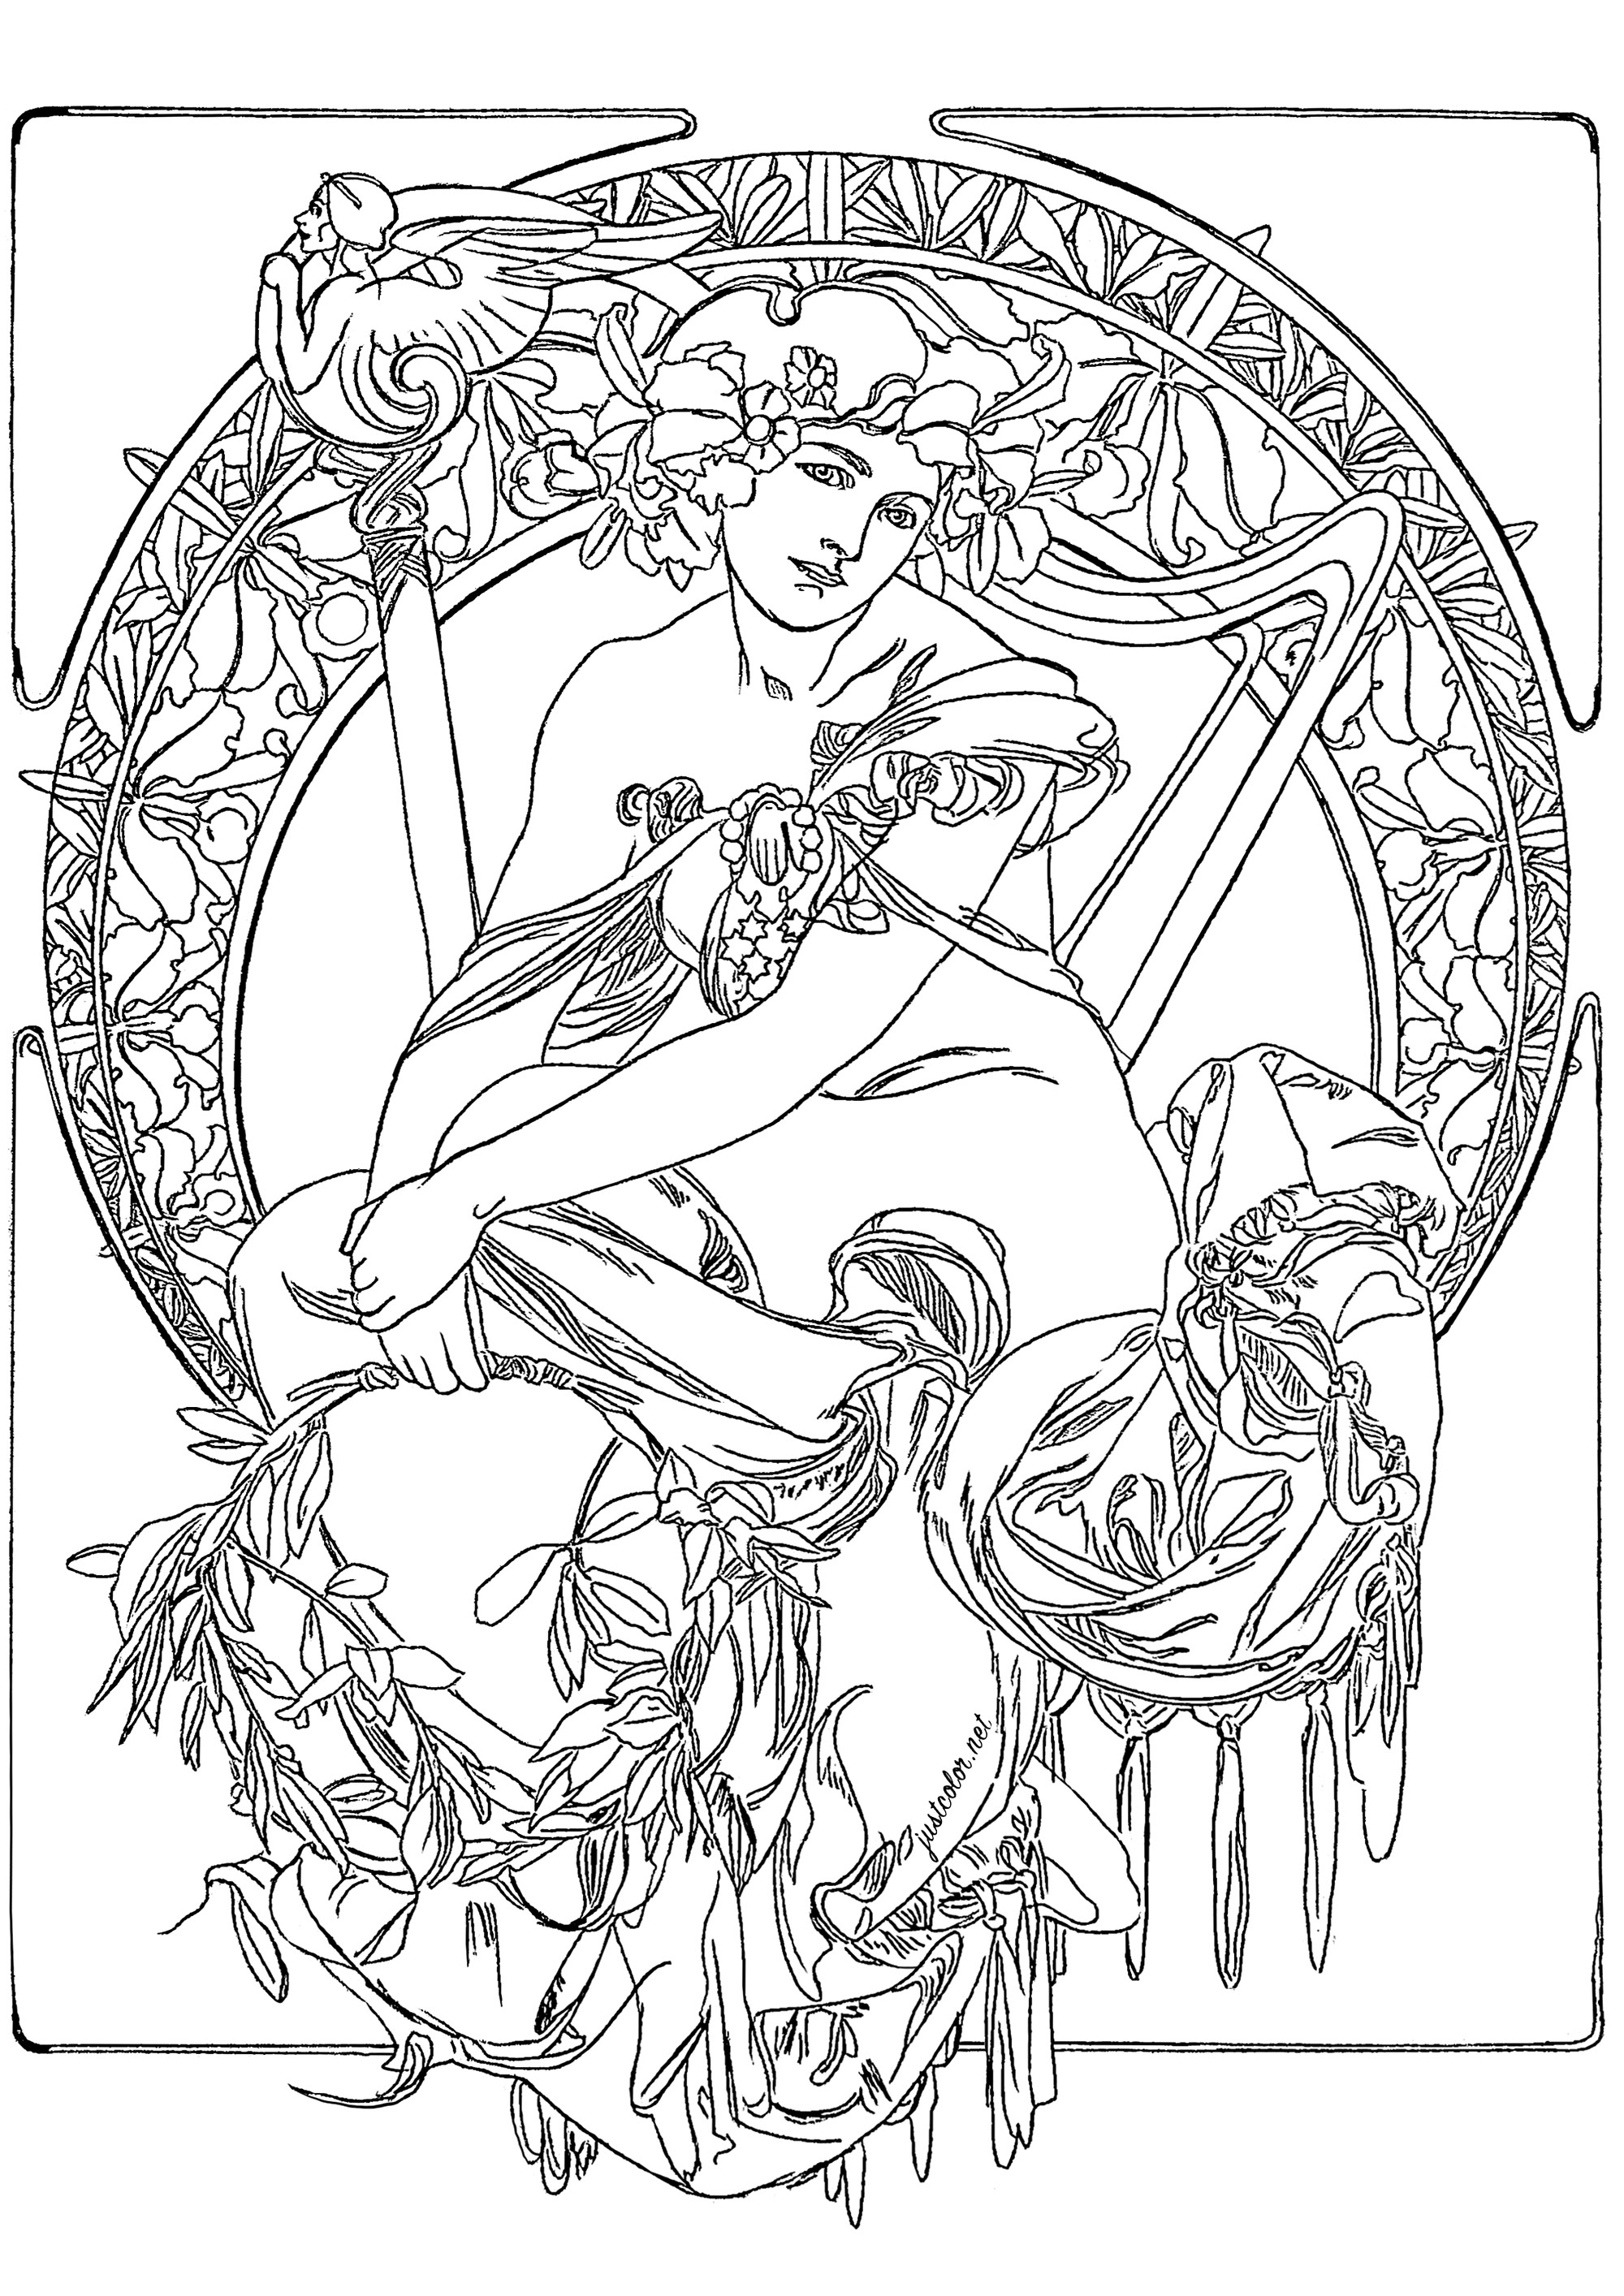 Alfons Mucha - Study for an advertising poster (1900). The composition is based on a central circle, surrounded by a series of floral and geometric motifs. The central circle features a female figure, whose clothes are adorned with floral motifs and a wreath of leaves and flowers. Although this is a sketch, the details are very precise, reflecting Mucha's finesse and attention to detail (the original drawing has been slightly reworked to allow coloring).